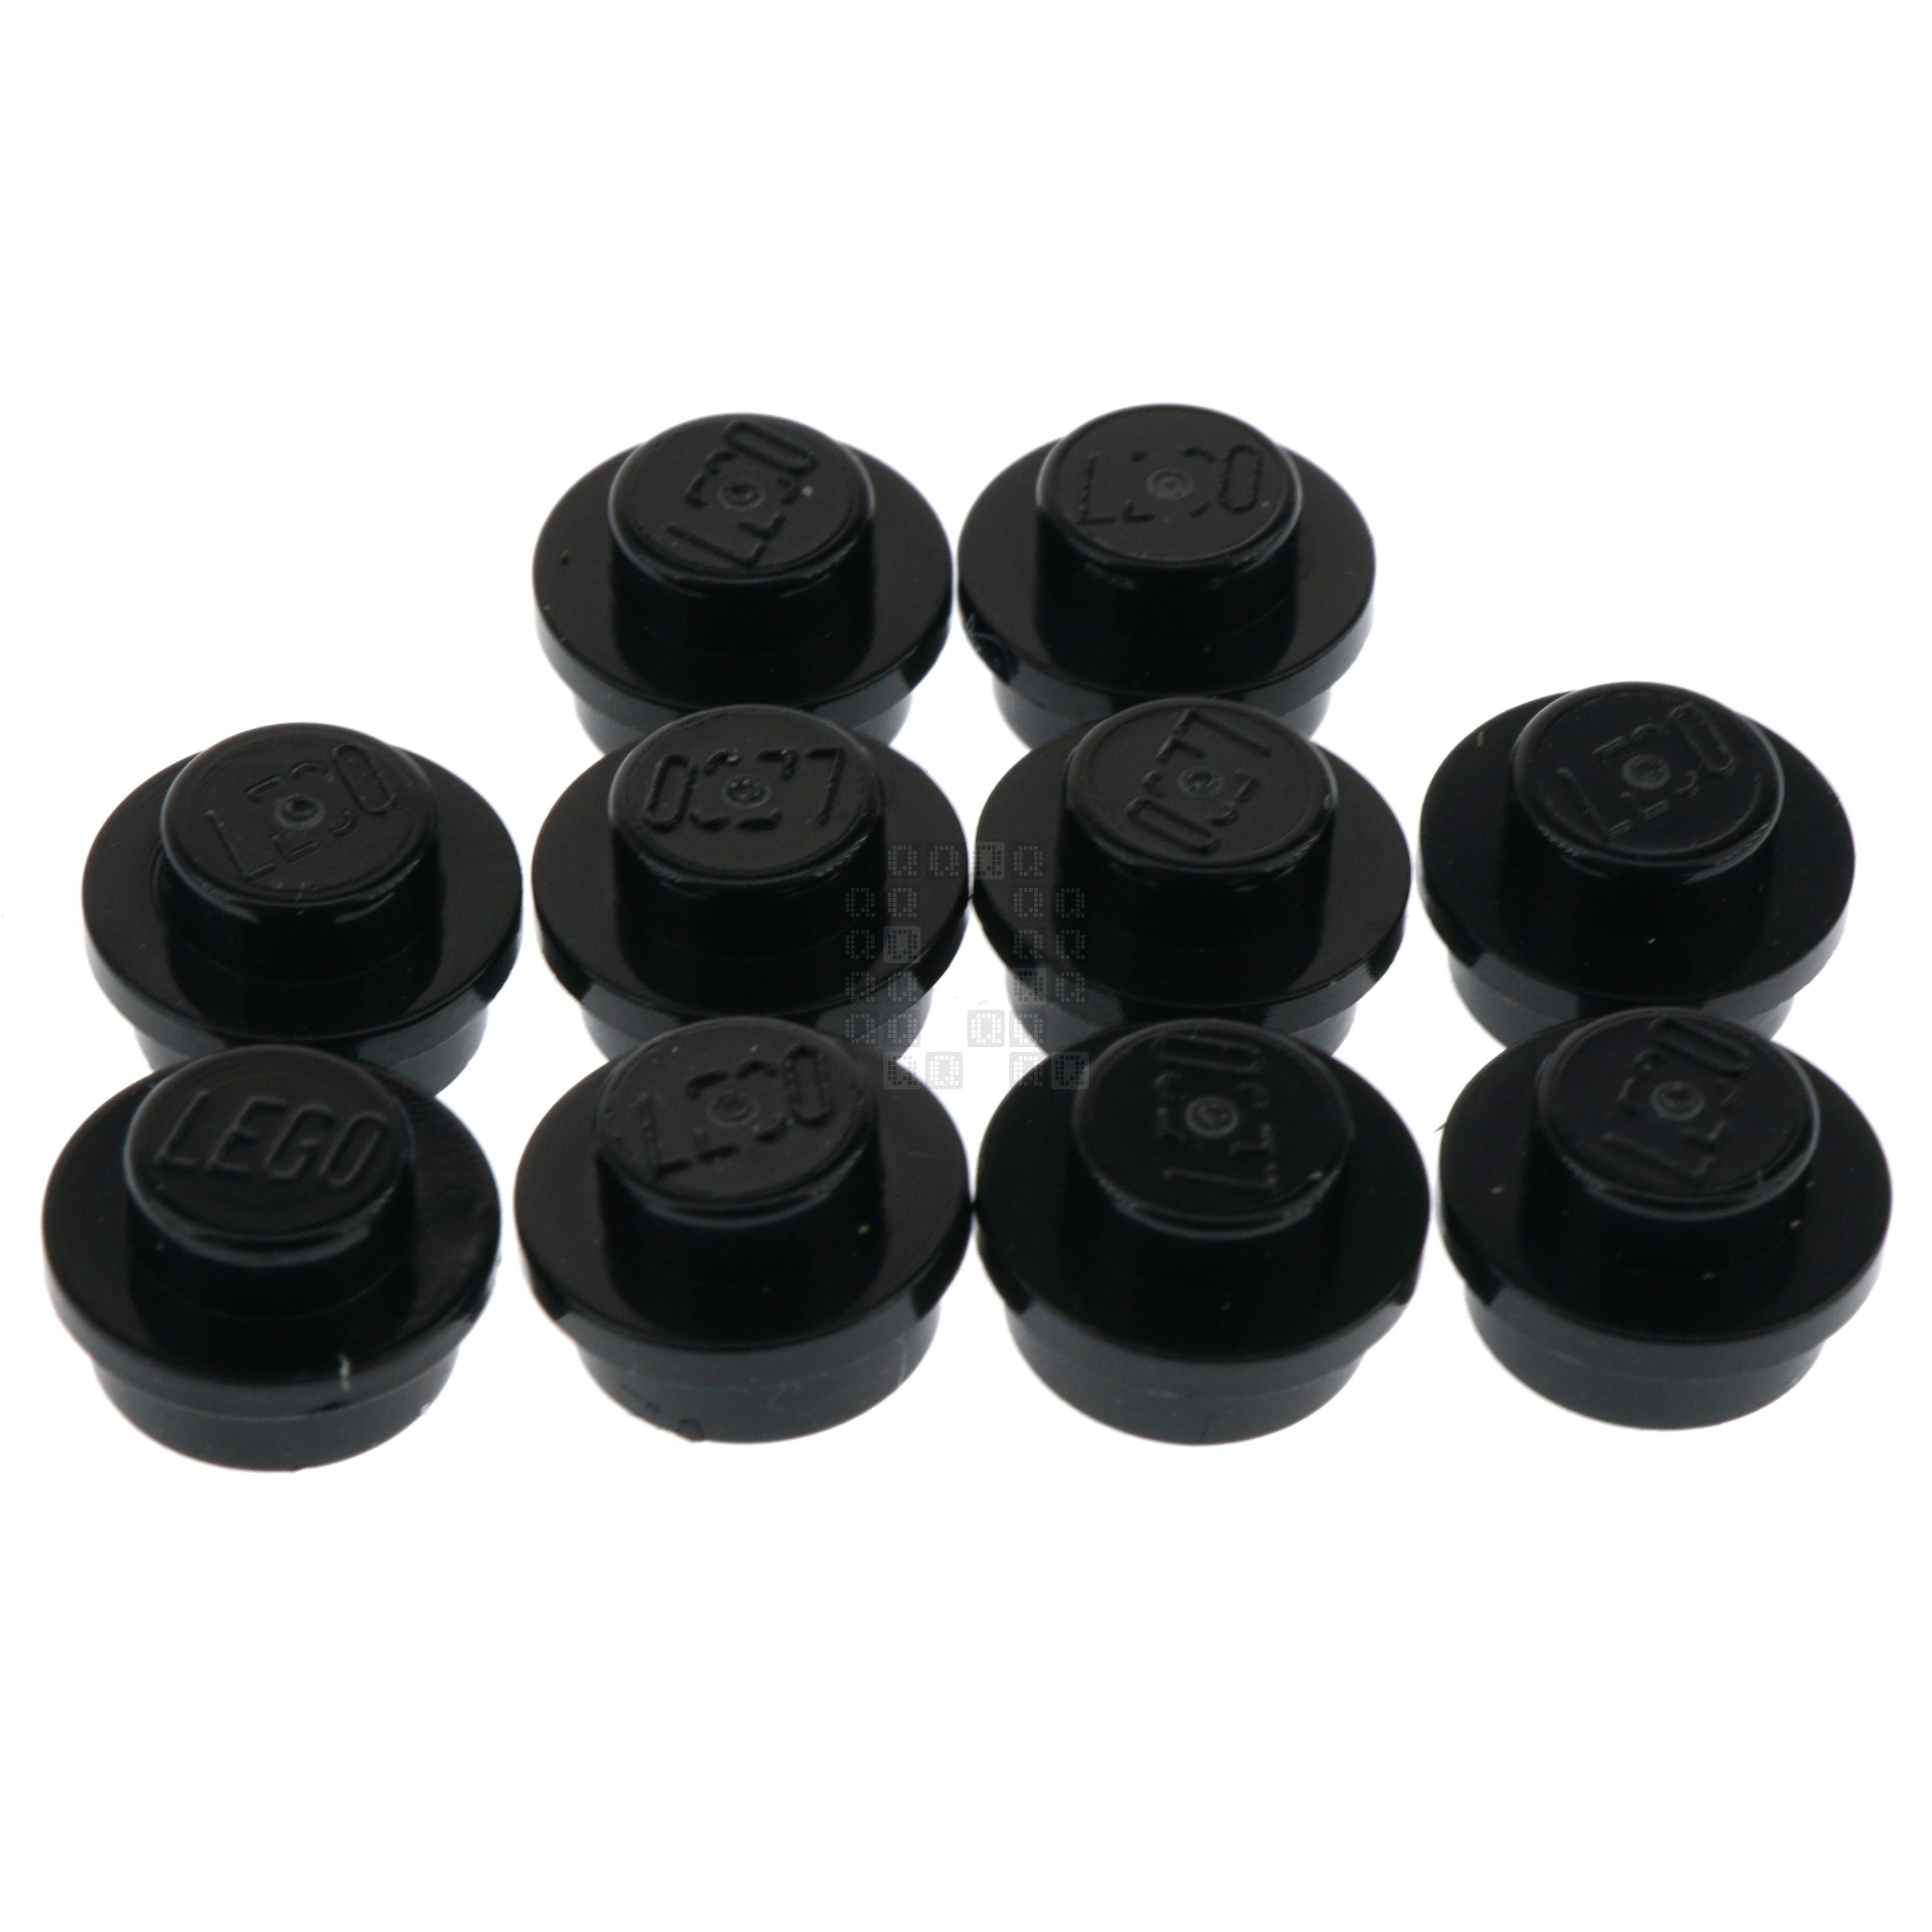 LEGO 614126 1x1 Round Plate, Black, 10-Pack